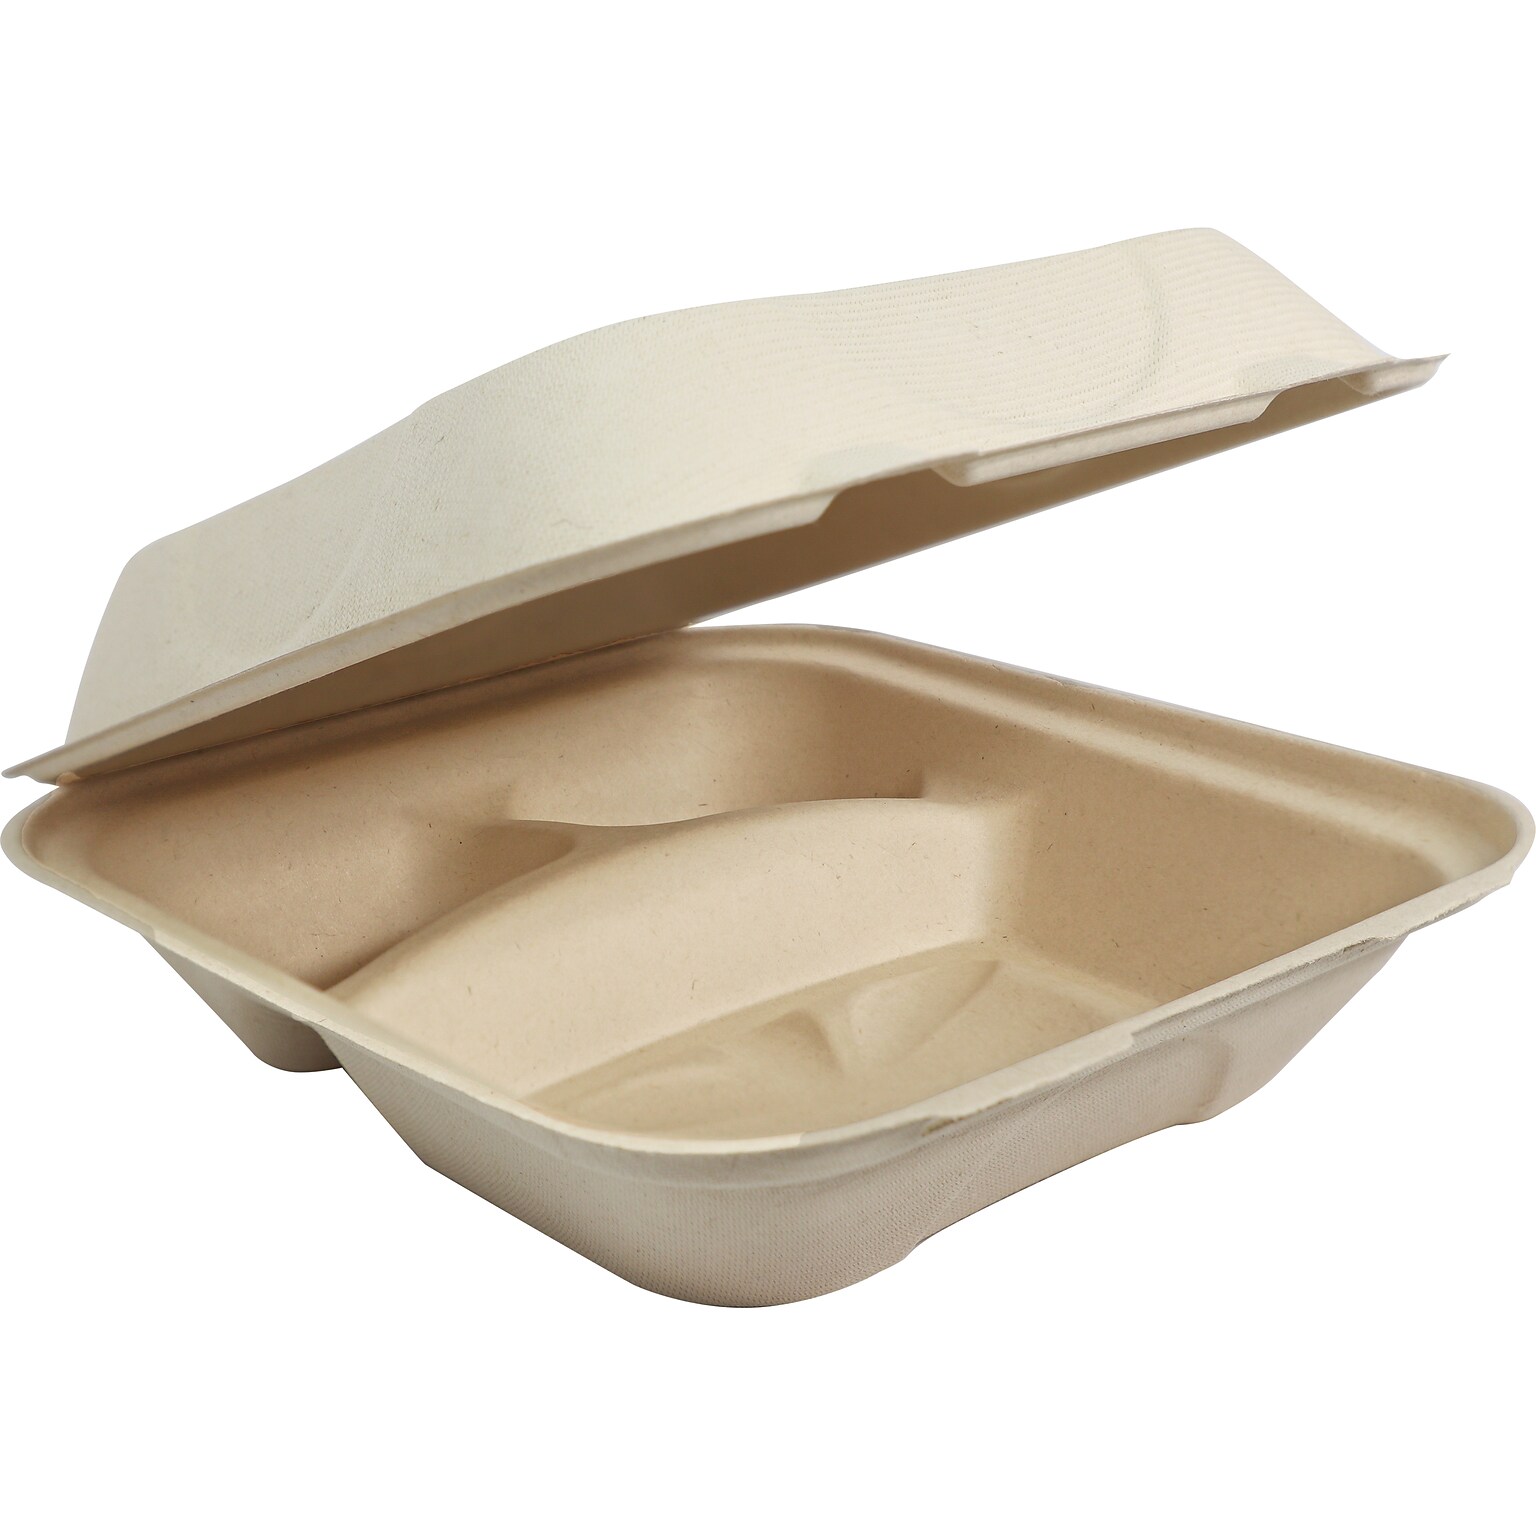 World Centric Fiber Hinged Containers, 3 Compartments, 8 x 8 x 3, Natural, 300/Carton